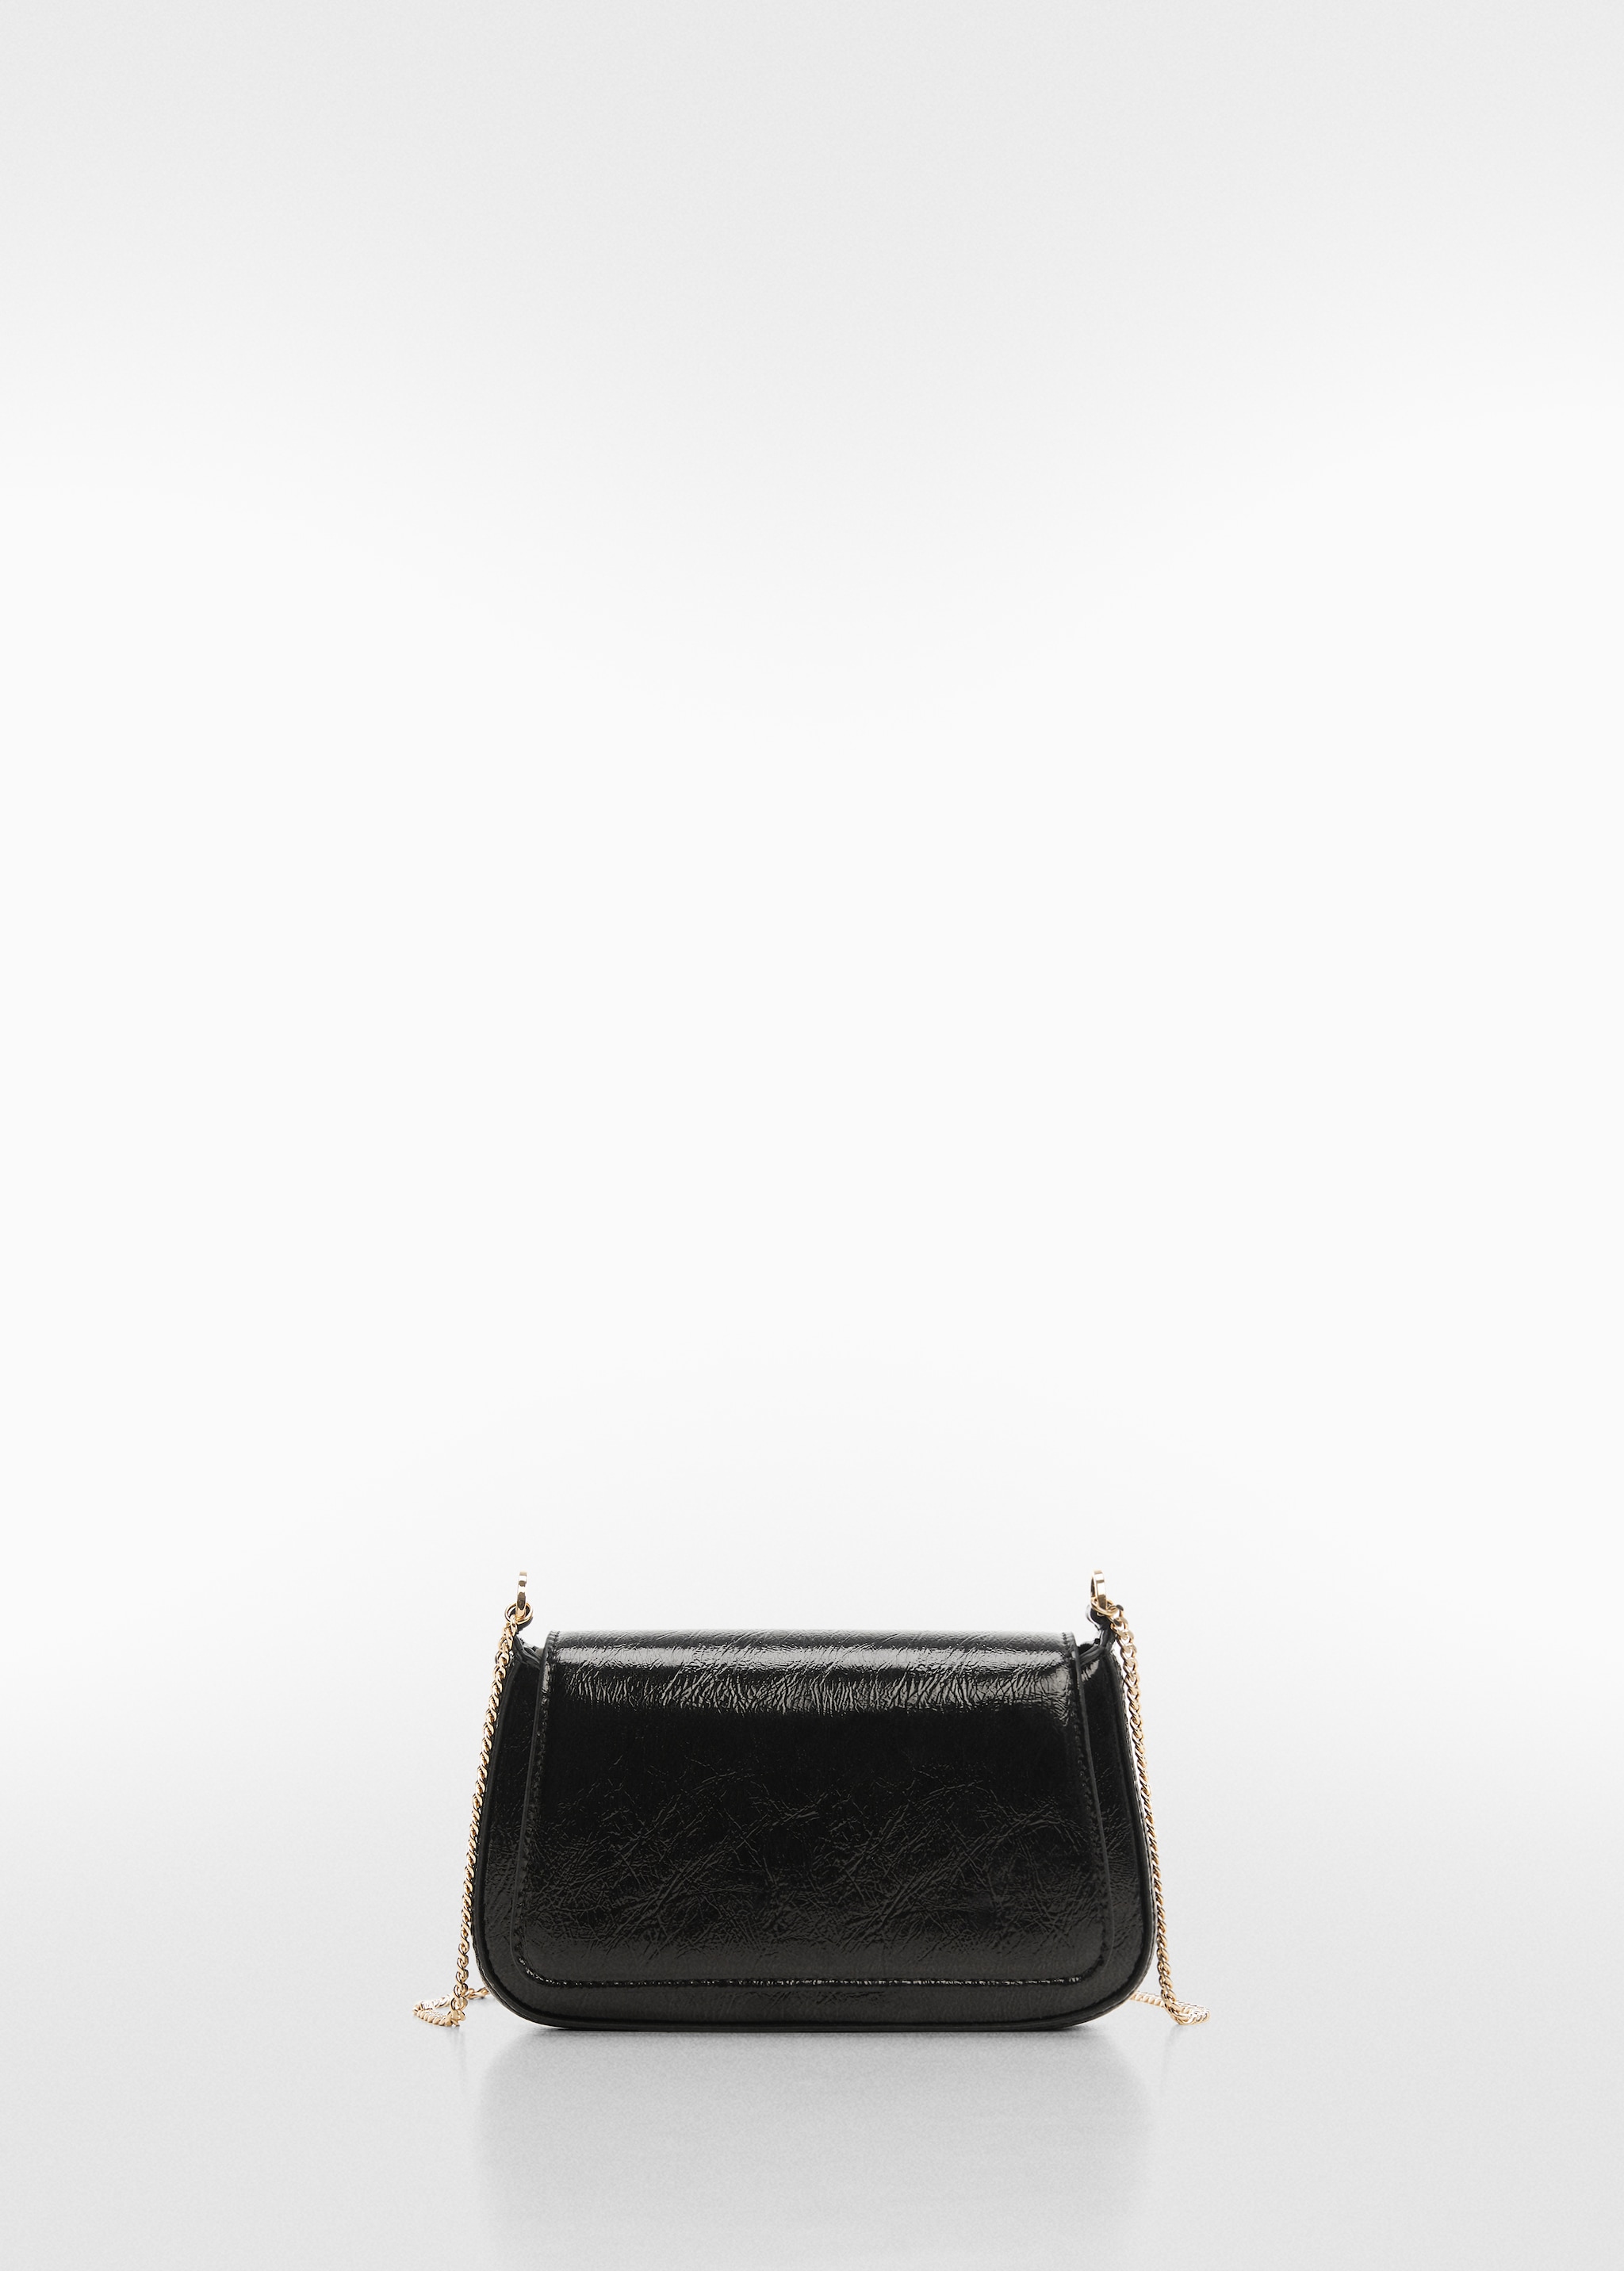 Patent leather effect chain bag - Article without model